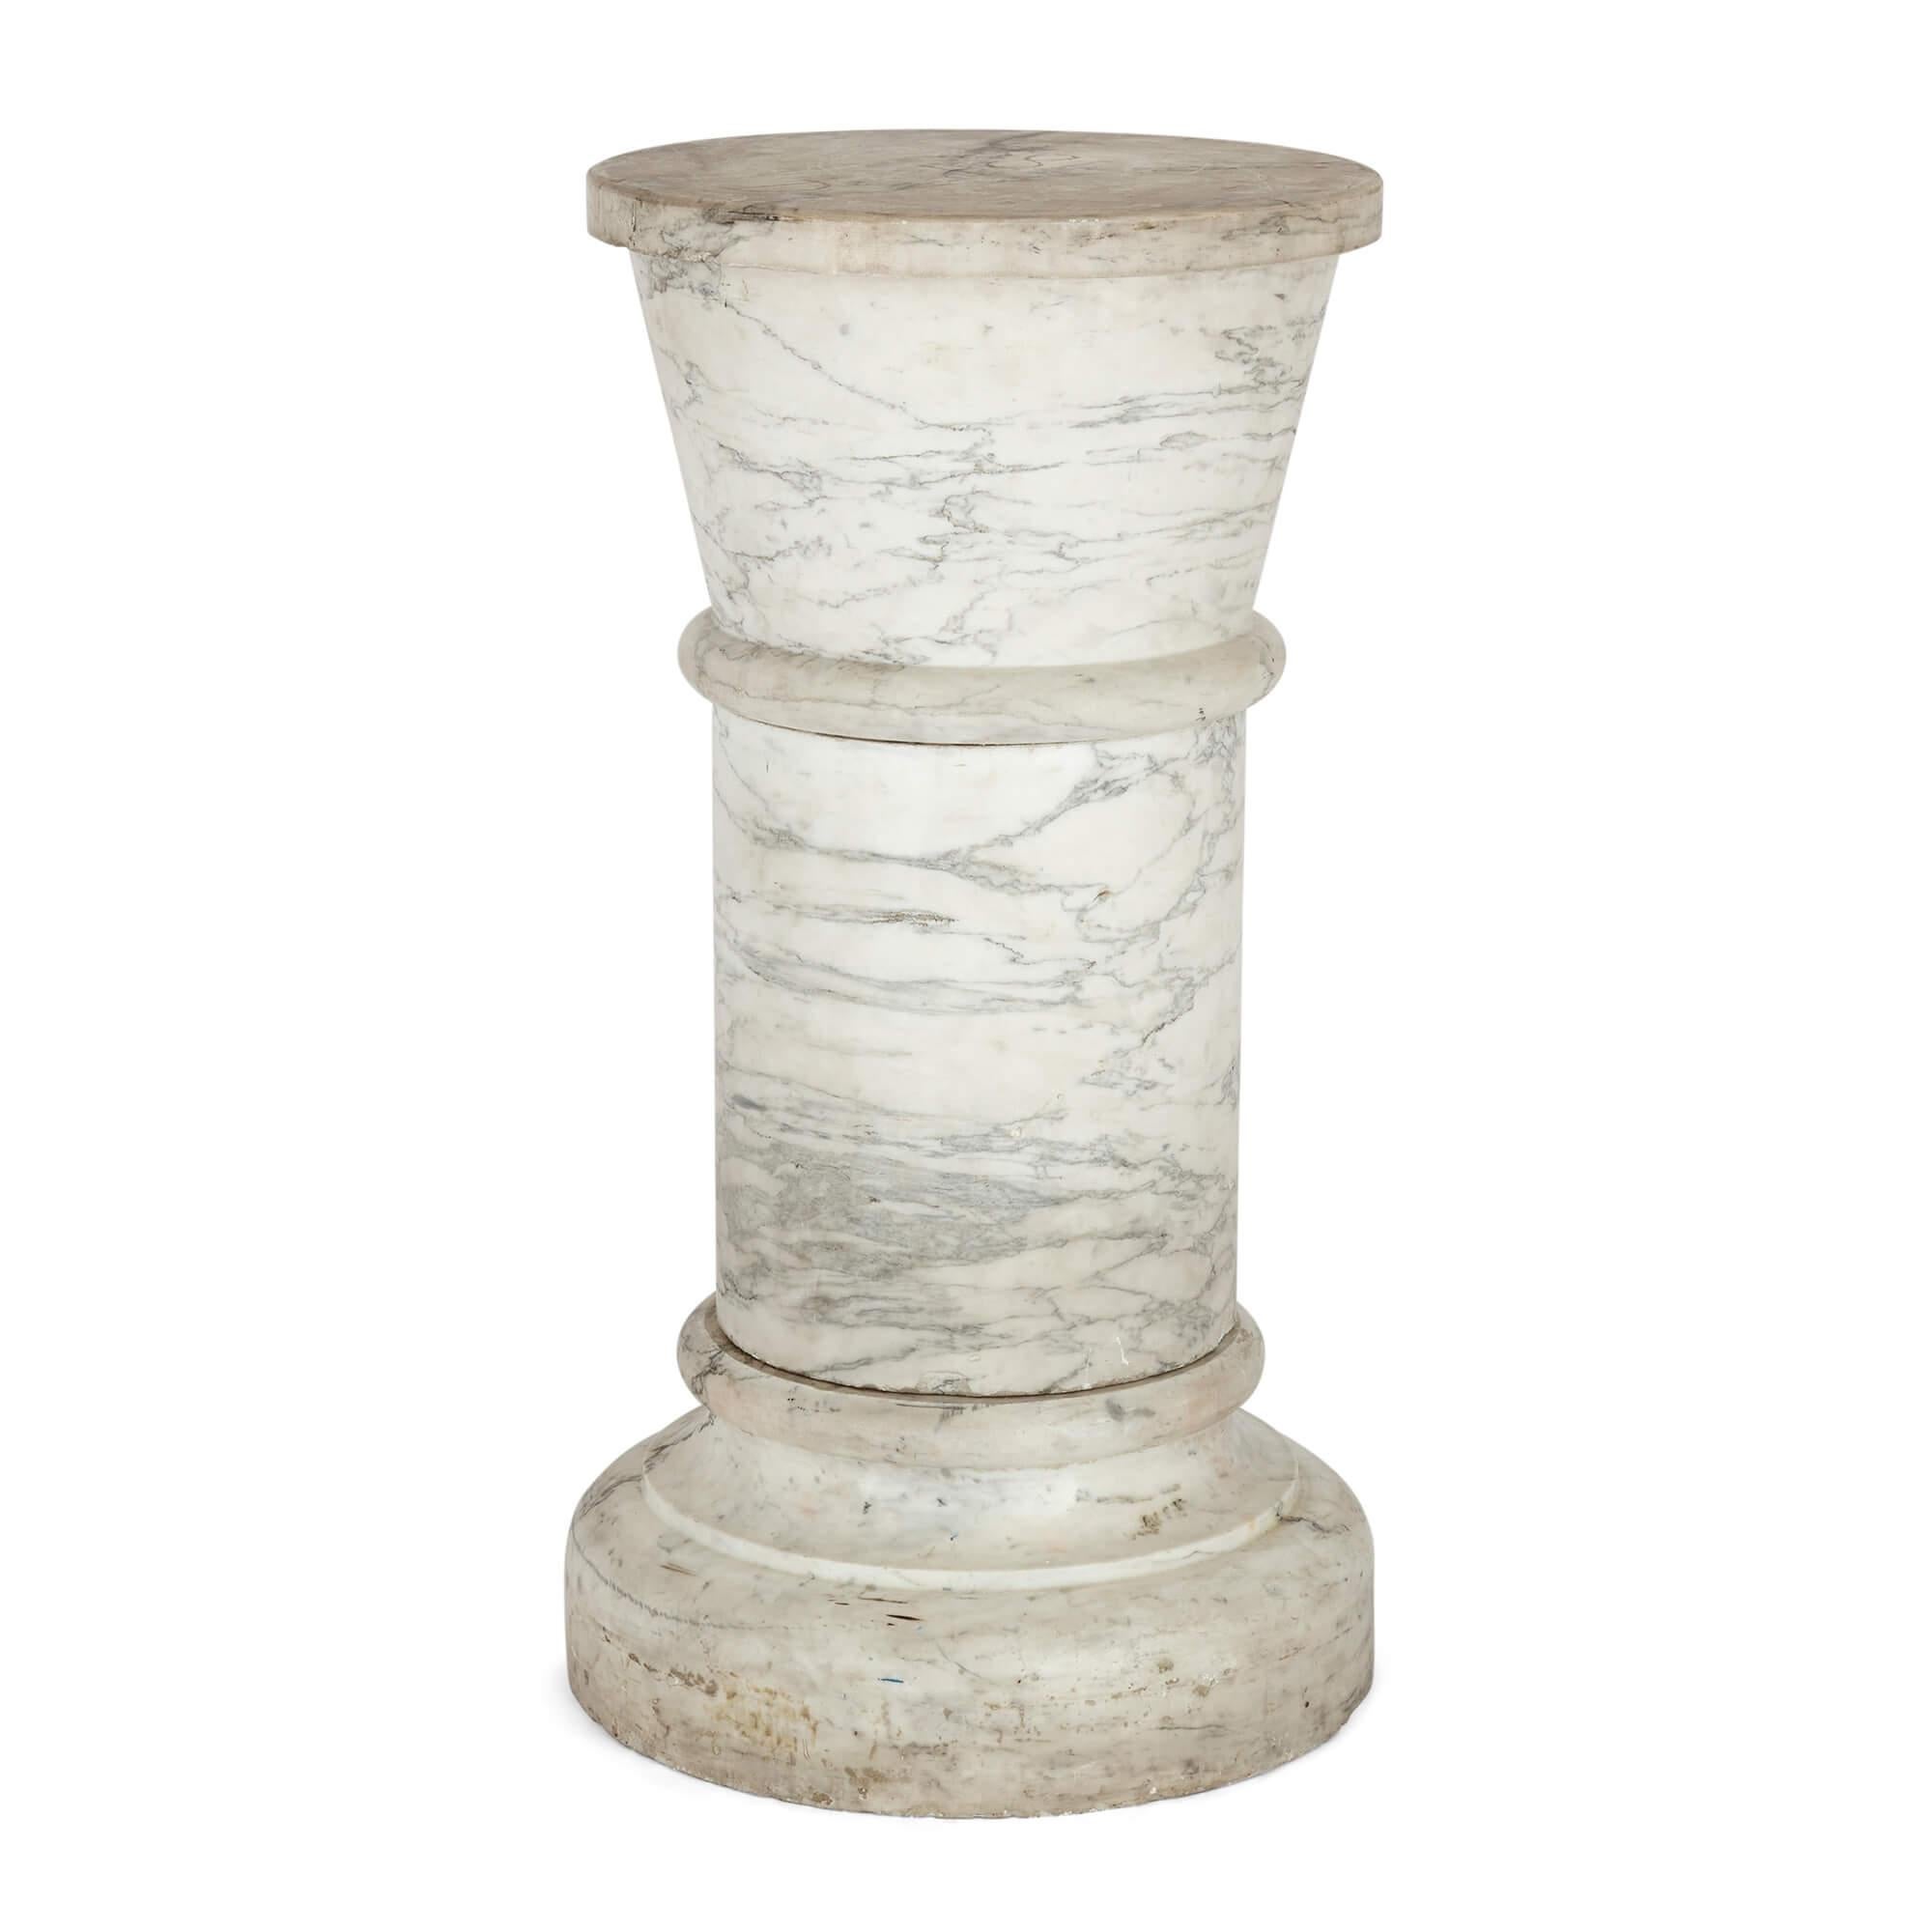 Large 19th century Neoclassical style white marble pedestal
Continental, late 19th century
Height 76cm, diameter 39cm

This pedestal sculpted from pristine white marble is a testament to the enduring allure of its Neoclassical design and to the